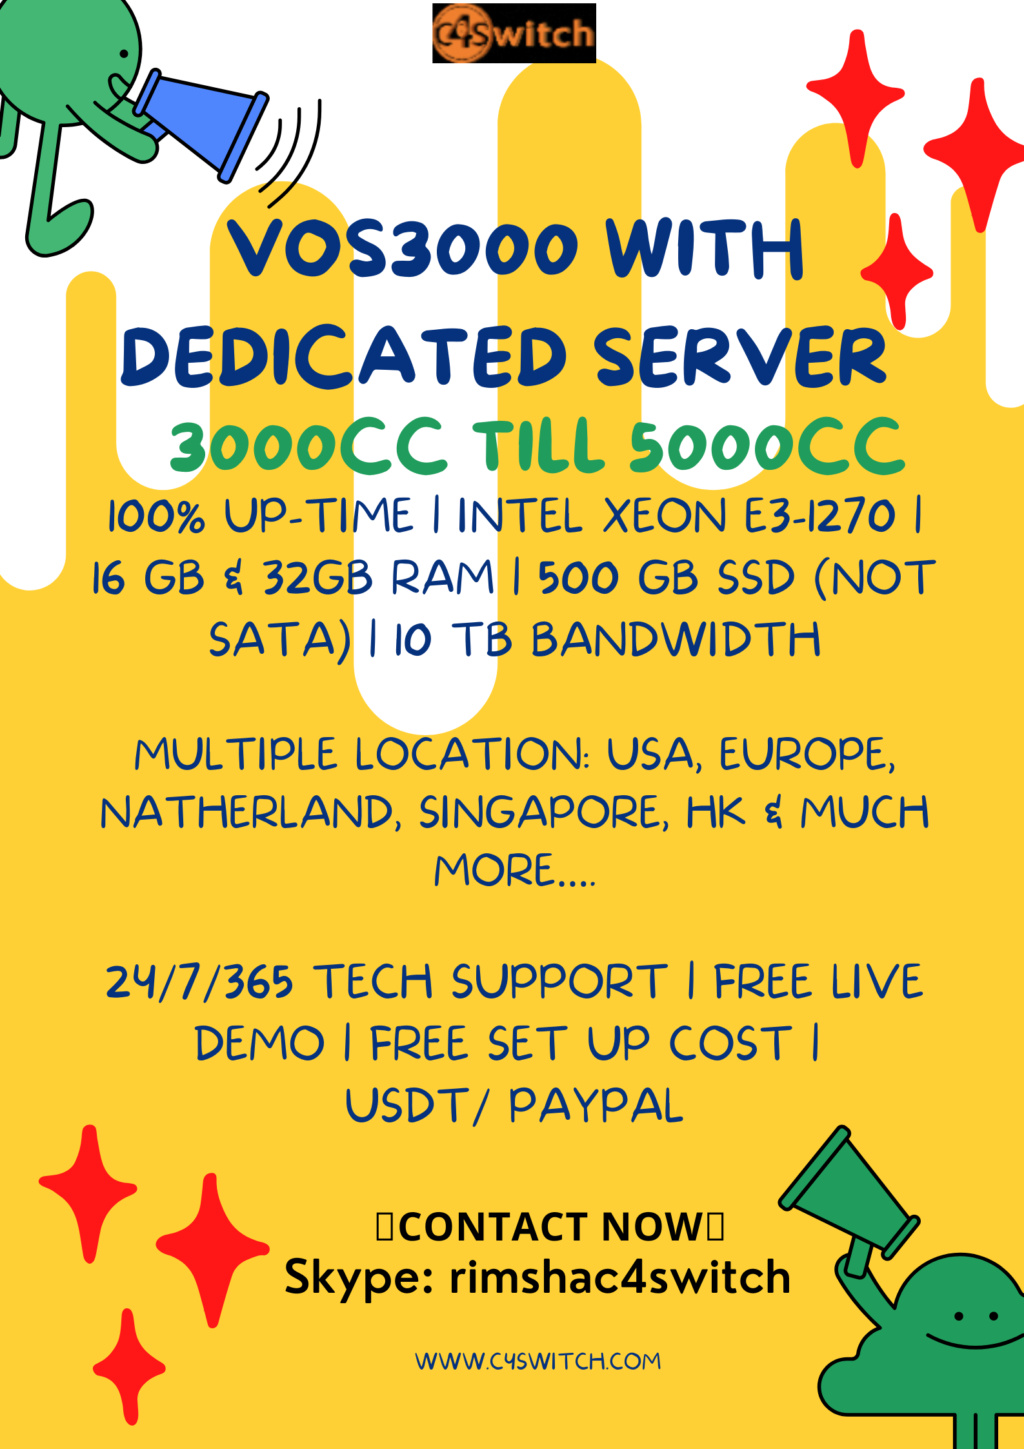 VOS3000 with DEDICATED SERVERS & MULTIPLE CO LOCATIONS.. Vos30014